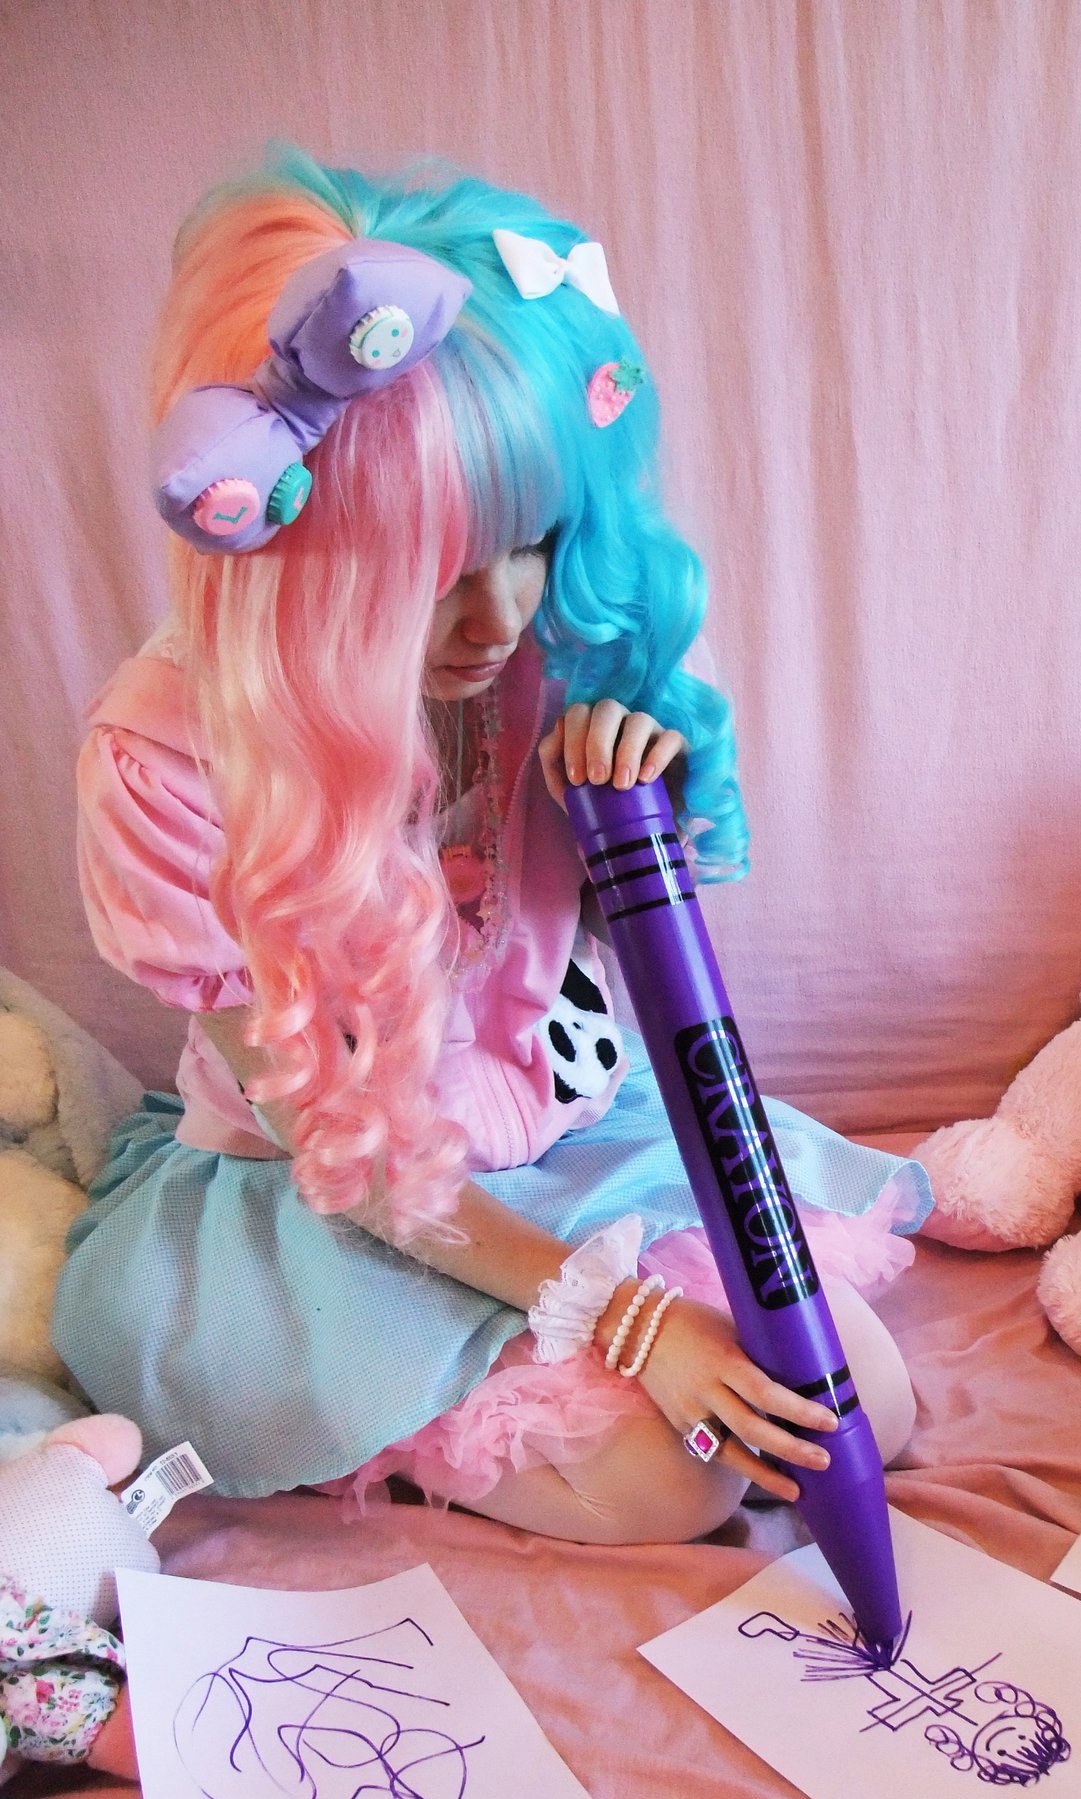 Teen Lolita with Blue and Pink Hair wearing White Opaque Pantyhose and Colored Short Dress